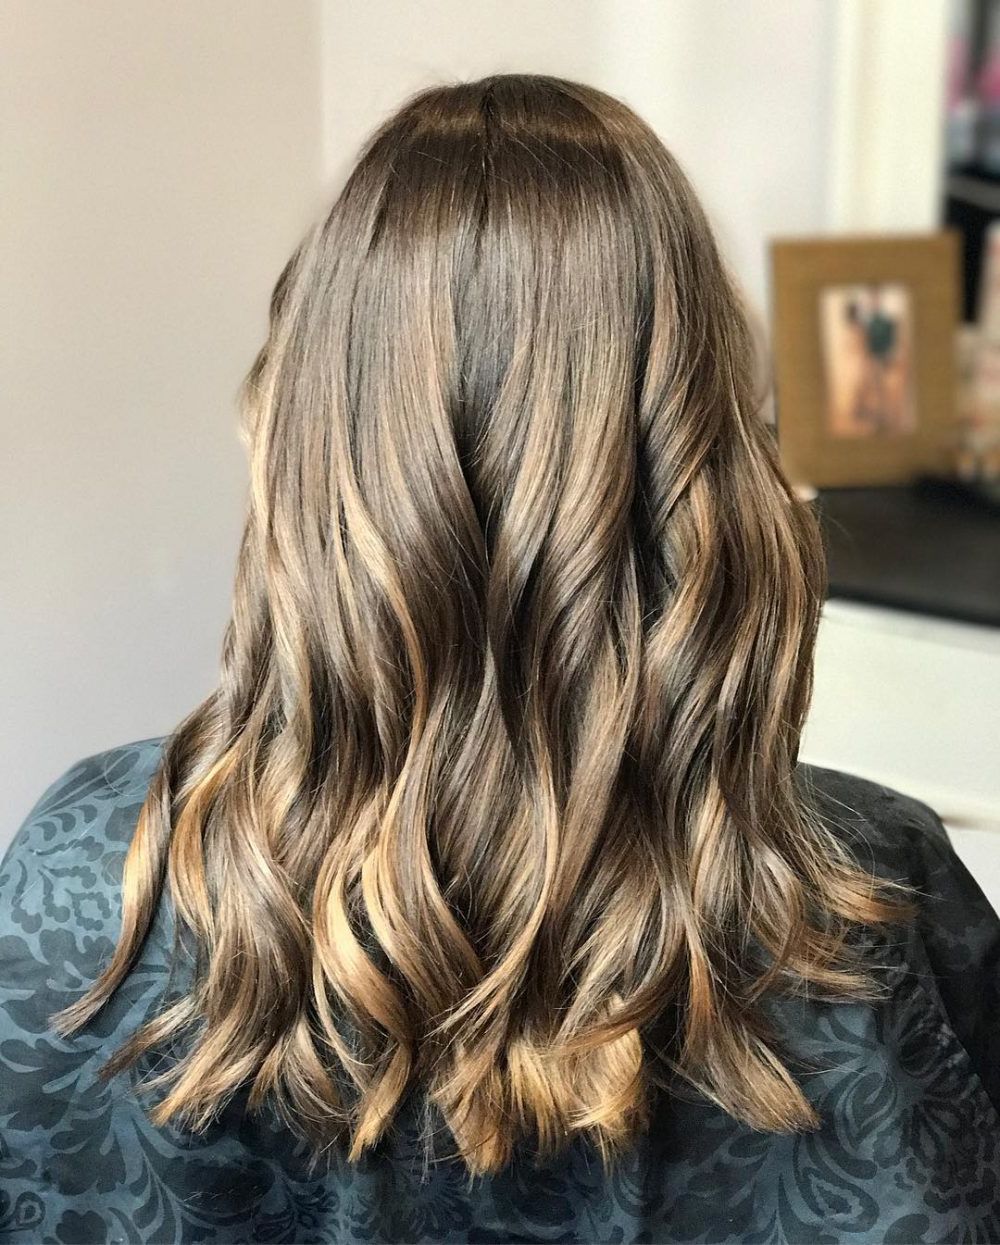 34 Sweetest Caramel Highlights On Light To Dark Brown Hair (2019) With Trendy Fringy Layers Hairstyles With Dimensional Highlights (View 8 of 20)